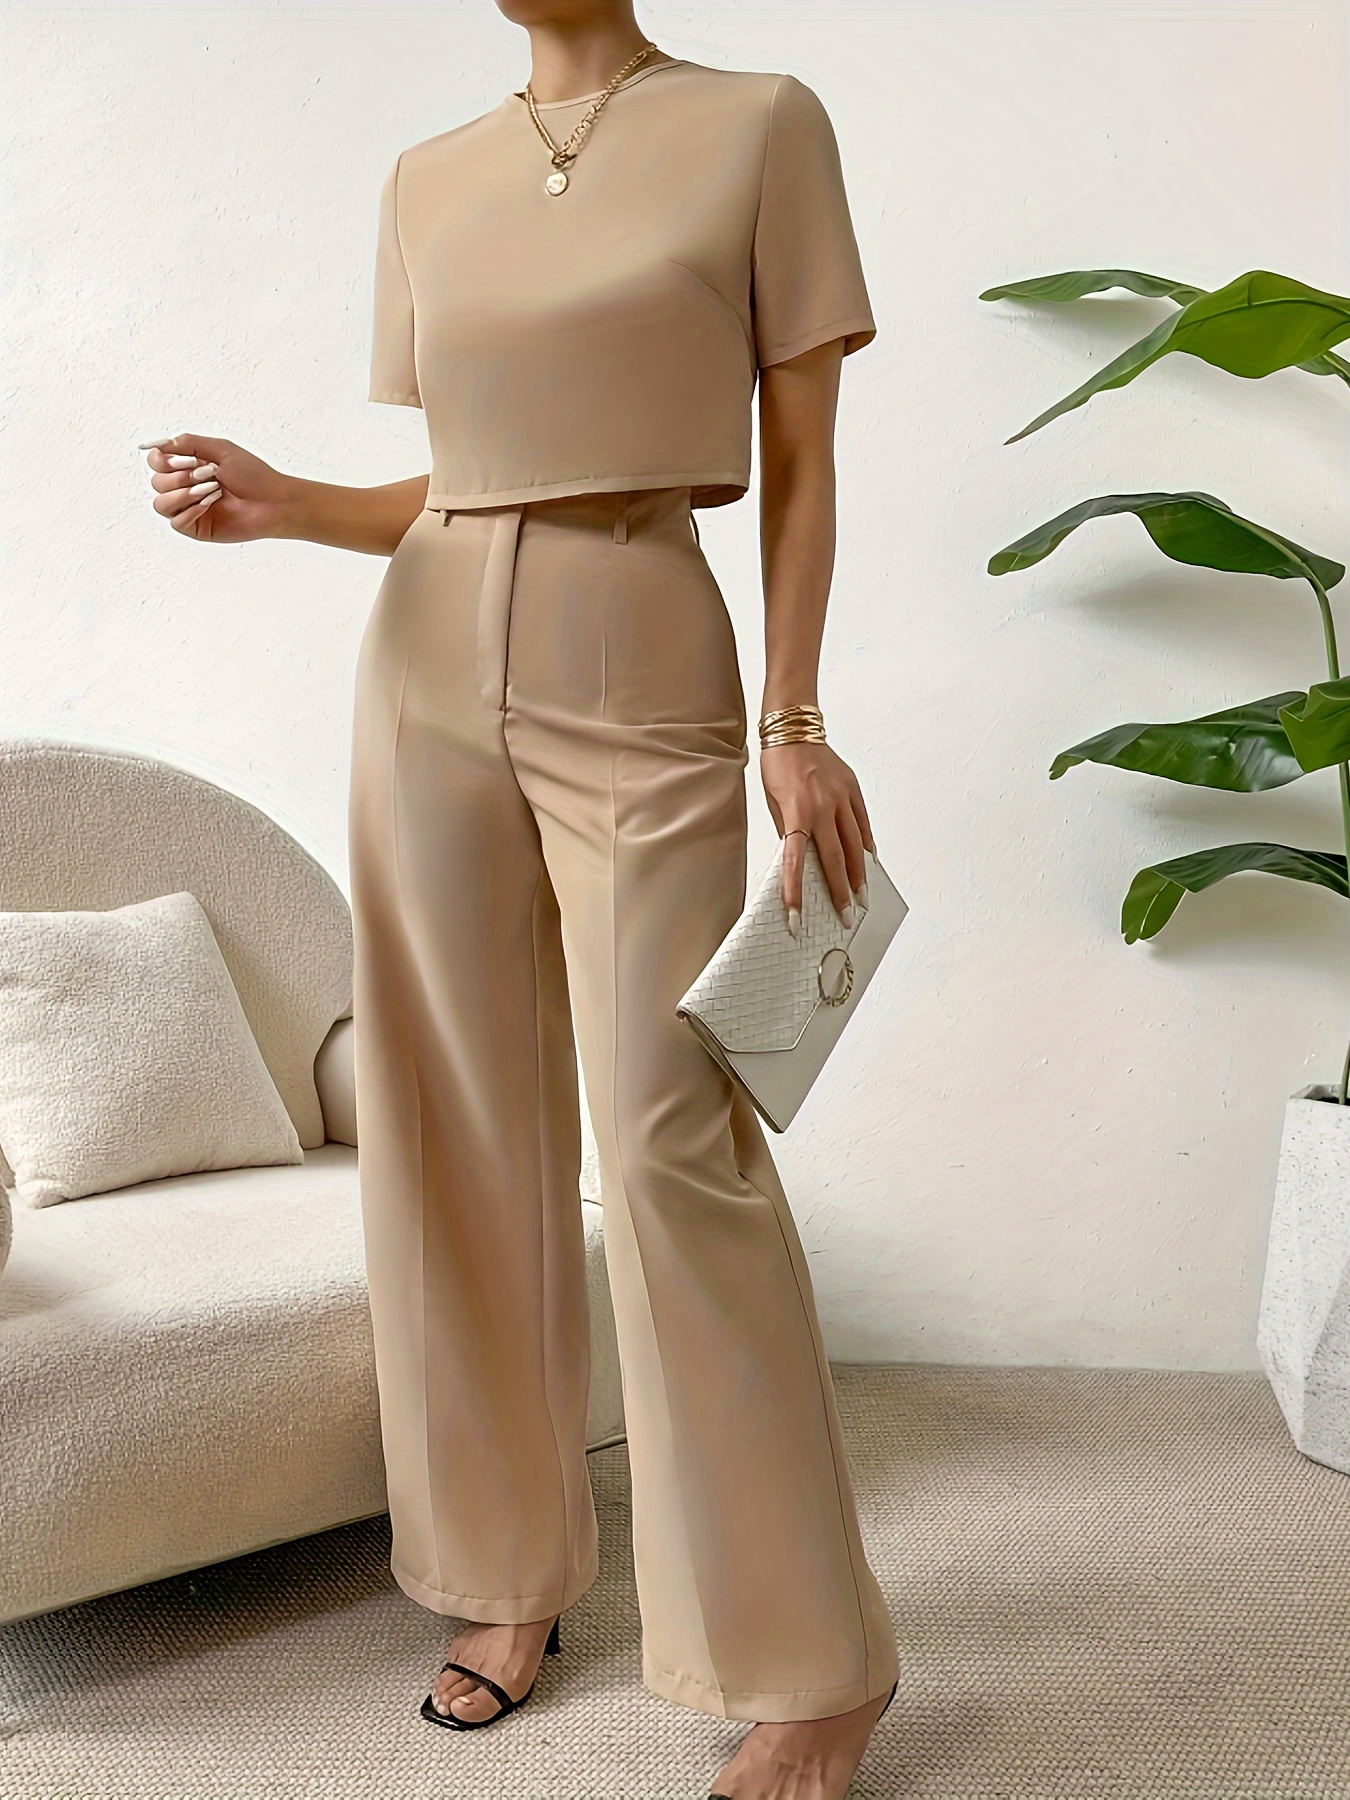 Solid Ribbed Two-piece Set, Slit Hem Sleeveless Tube Top & Flare Leg Pants  Outfits, Women's Clothing